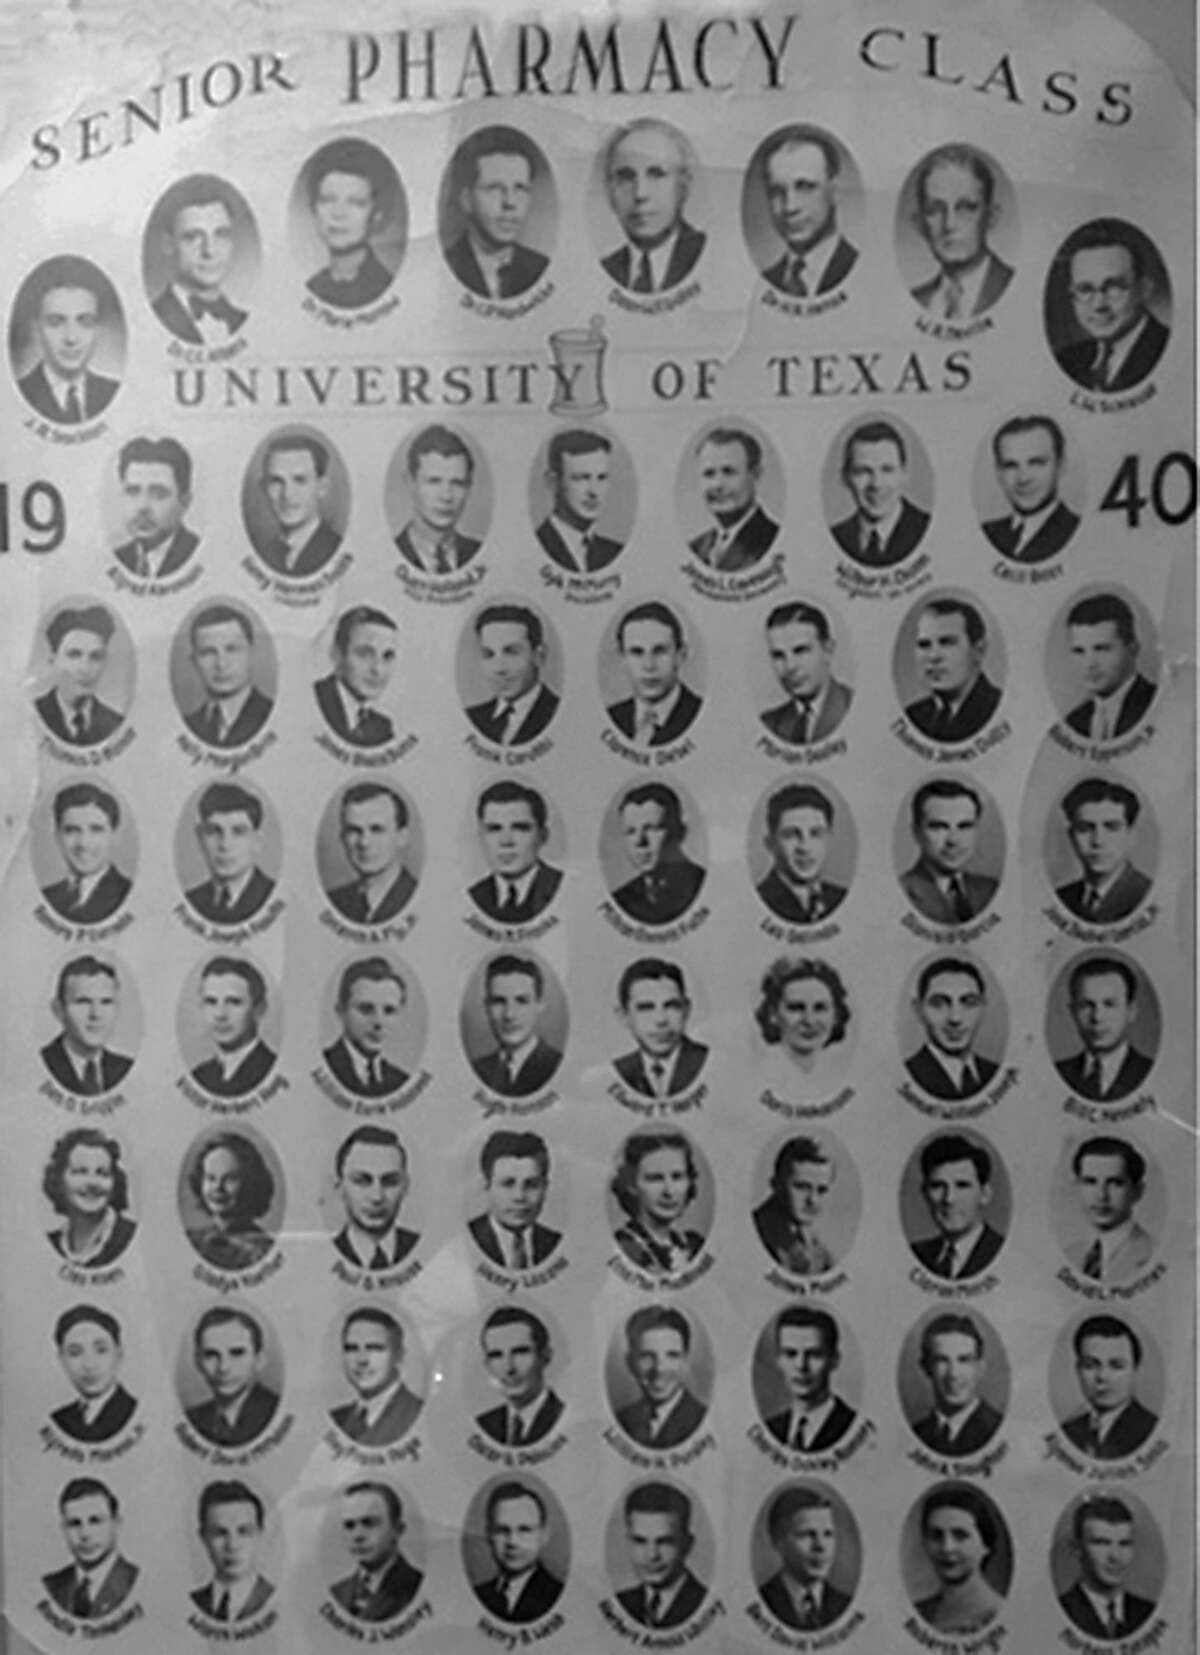 This collage of photos shows the Class of 1940 of UT’s School of Pharmacy; Dionicio Garcia of San Antonio was one of only eight Hispanic graduates that year. He was the father of Father David Garcia, pastor of Mission Concepcion and director of the Old Spanish Missions in San Antonio. Father David and three of his sisters were born at the Saenz Clinic where Dionicio was the pharmacist.